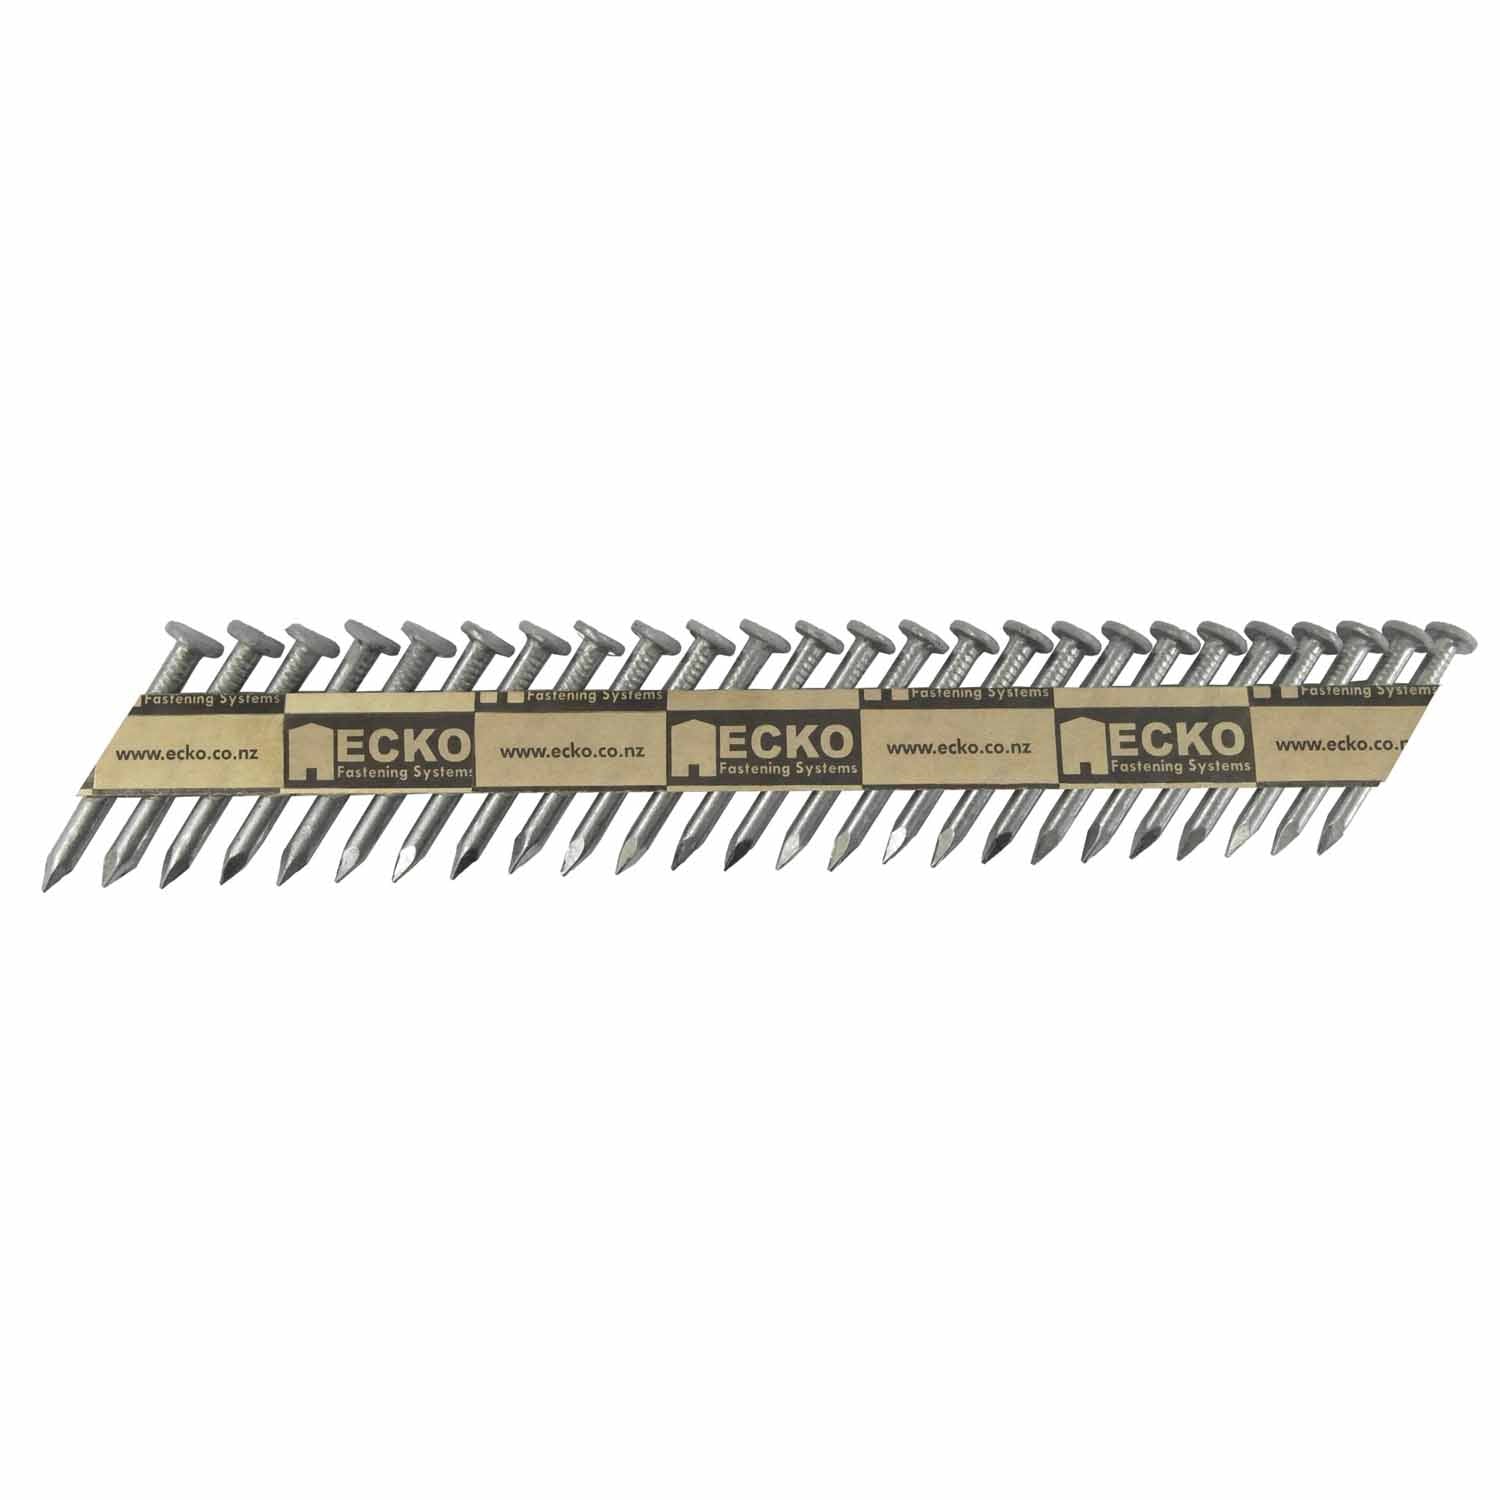 Ecko Galvanised Smooth 38 X3.33Mm Joist Hanger / Product Nails (2000 Box)